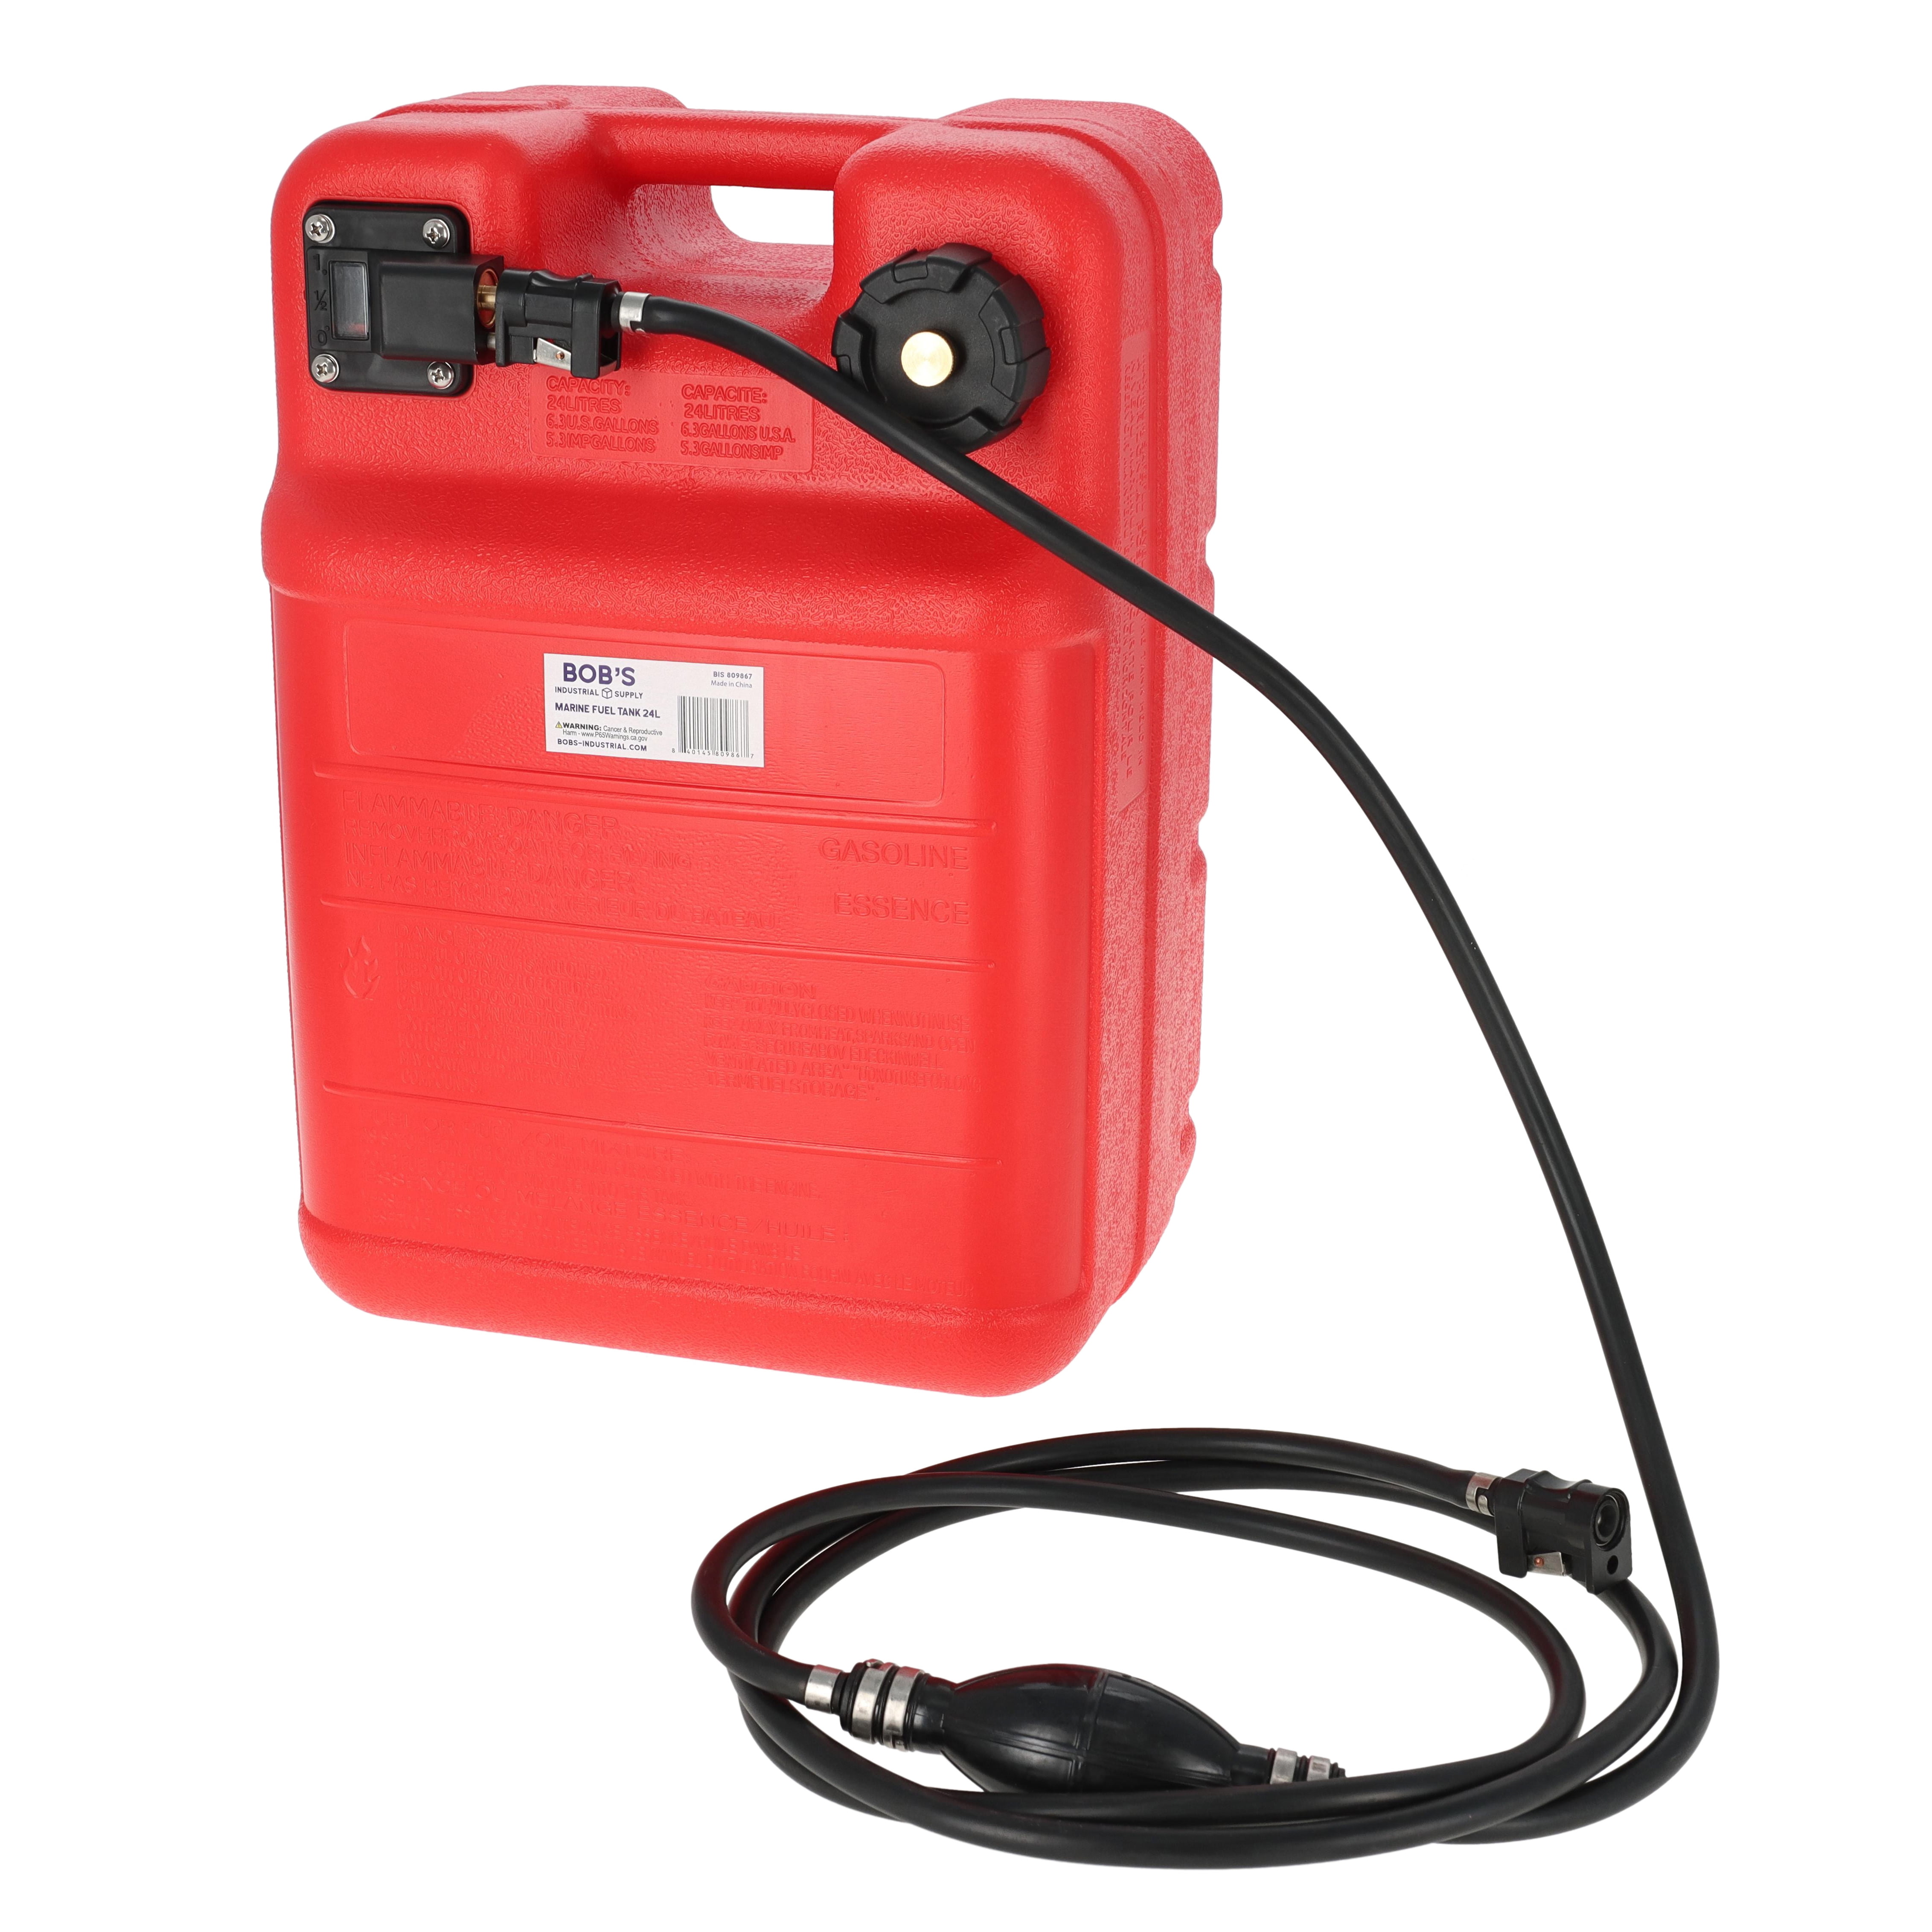 Portable Boat Outboard Fuel Tank Marine Motor Fuel Tank 6 Gallon 24L With Fuel Hose Line And Connector Compatible With Inflatables Canoes And Kayaks 